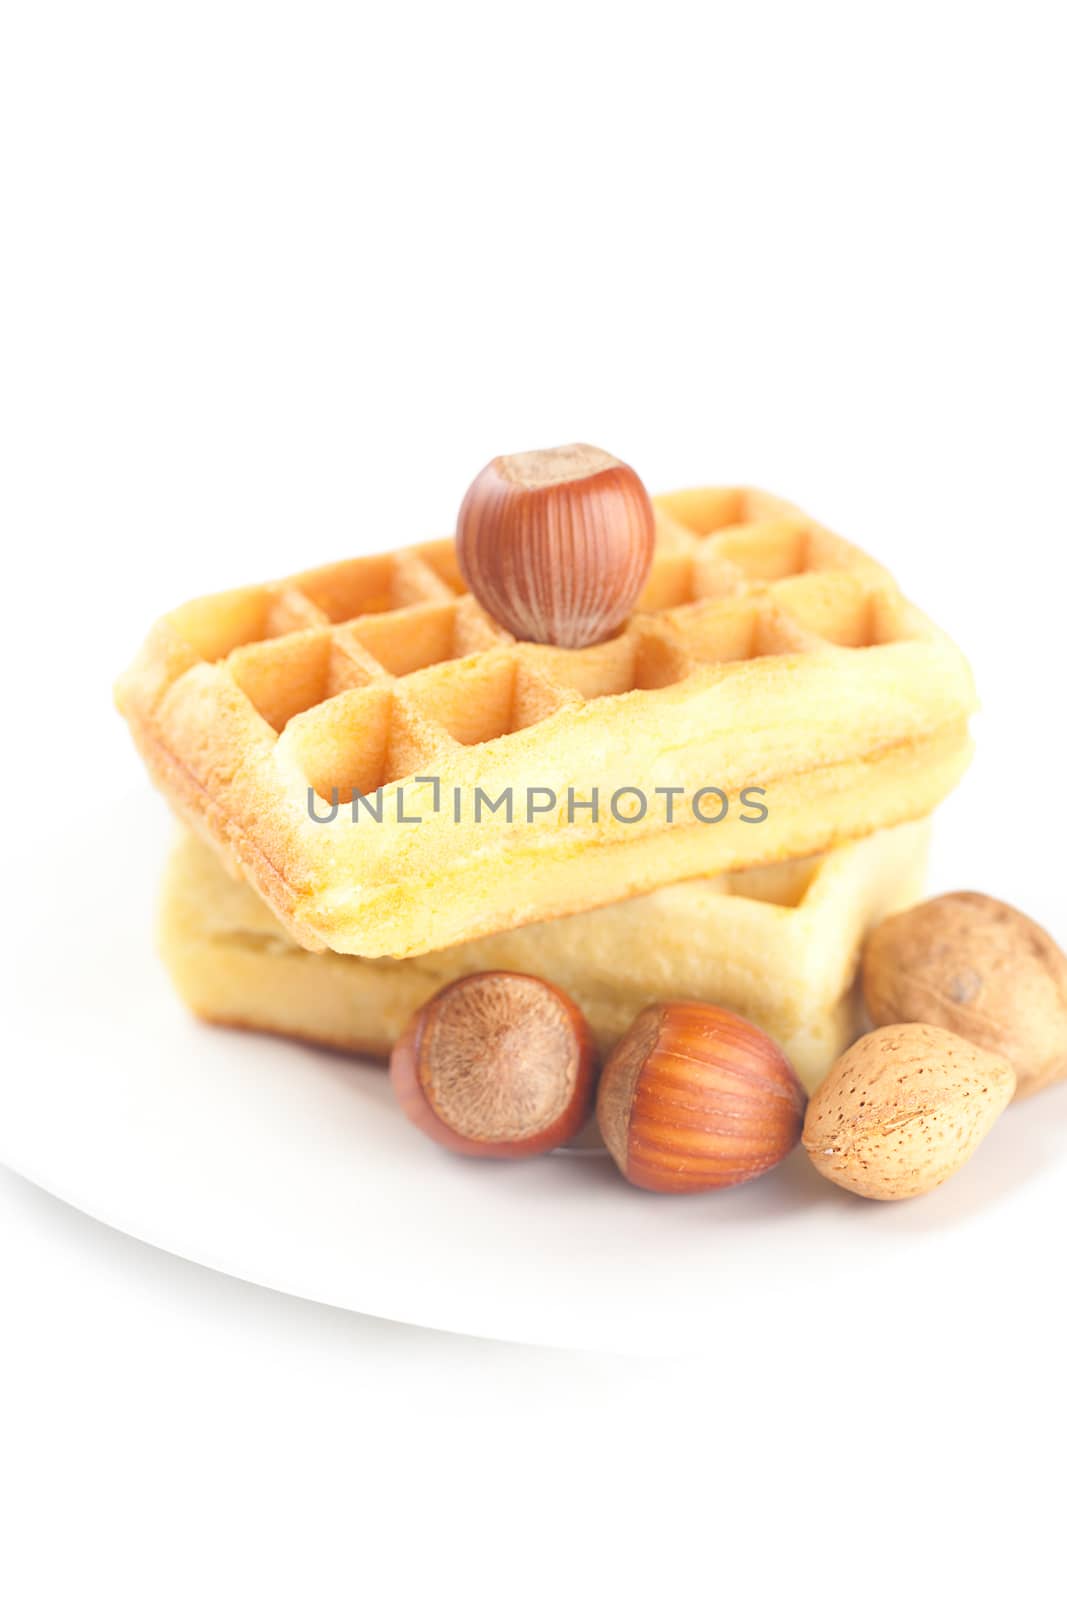 Belgian waffles and nuts on a plate isolated on white